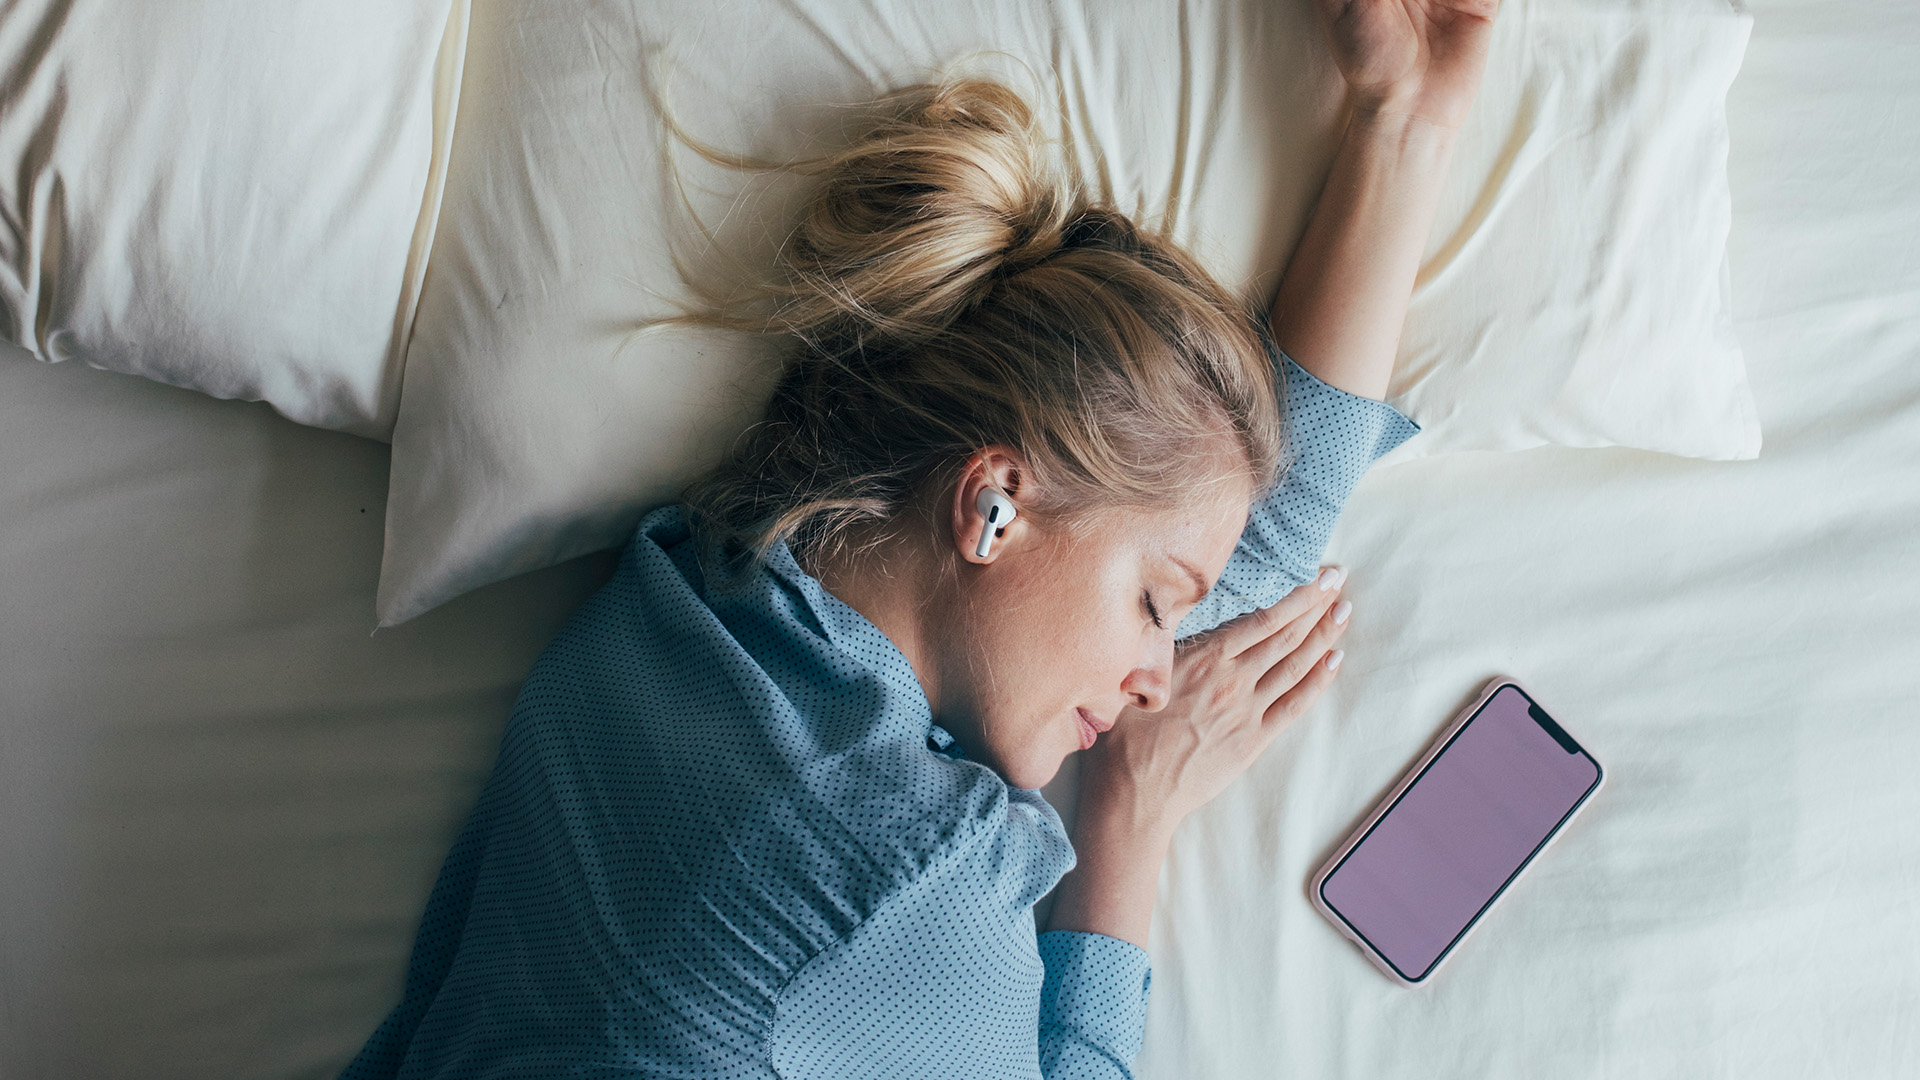 Woman in Pyjamas With Wireless Headphones Listening to Relaxing Music on Her Smartphone in Bed in the Morning - stock photo